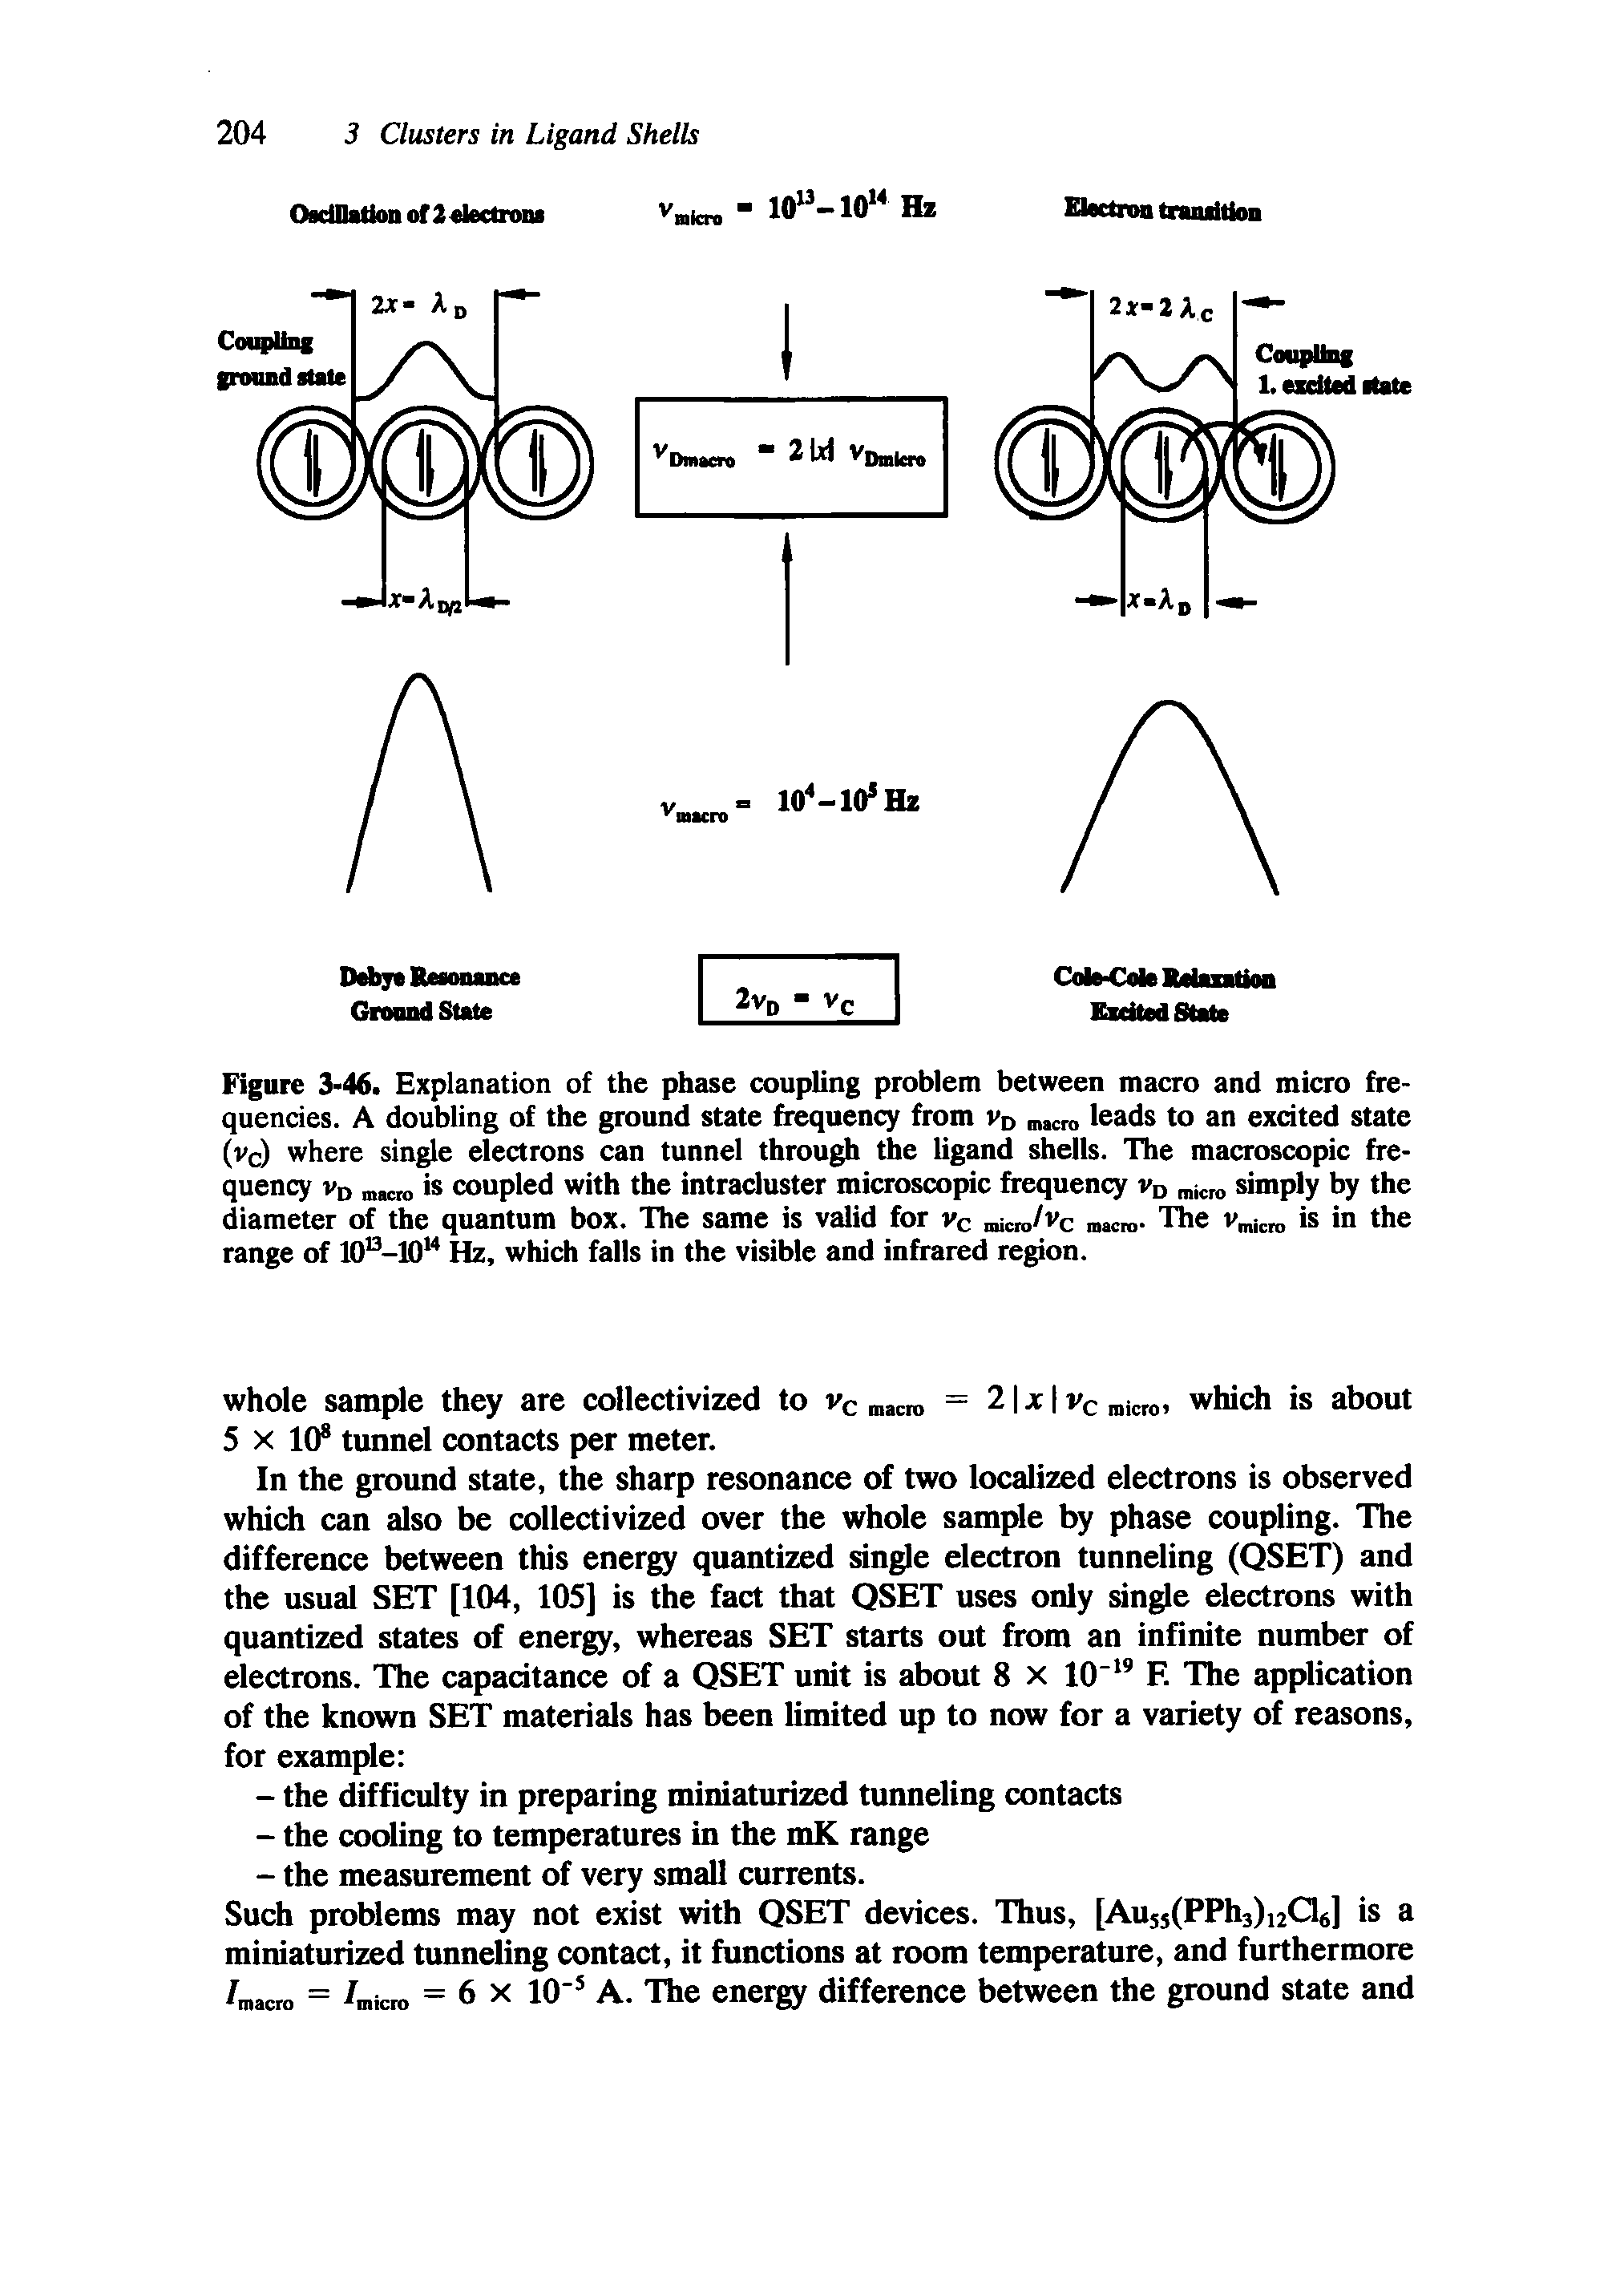 Figure 3-46. Explanation of the phase coupling problem between macro and micro frequencies. A doubling of the ground state fir uency from Vd m cro leads to an exdted state (vc) where single electrons can tunnel through the ligand shells. The macroscopic frequency Vd macro coupled with the intraduster microscopic frequency Vp micn> simply by the diameter of the quantum box. The same is valid for vc acio The v-r— is in the...